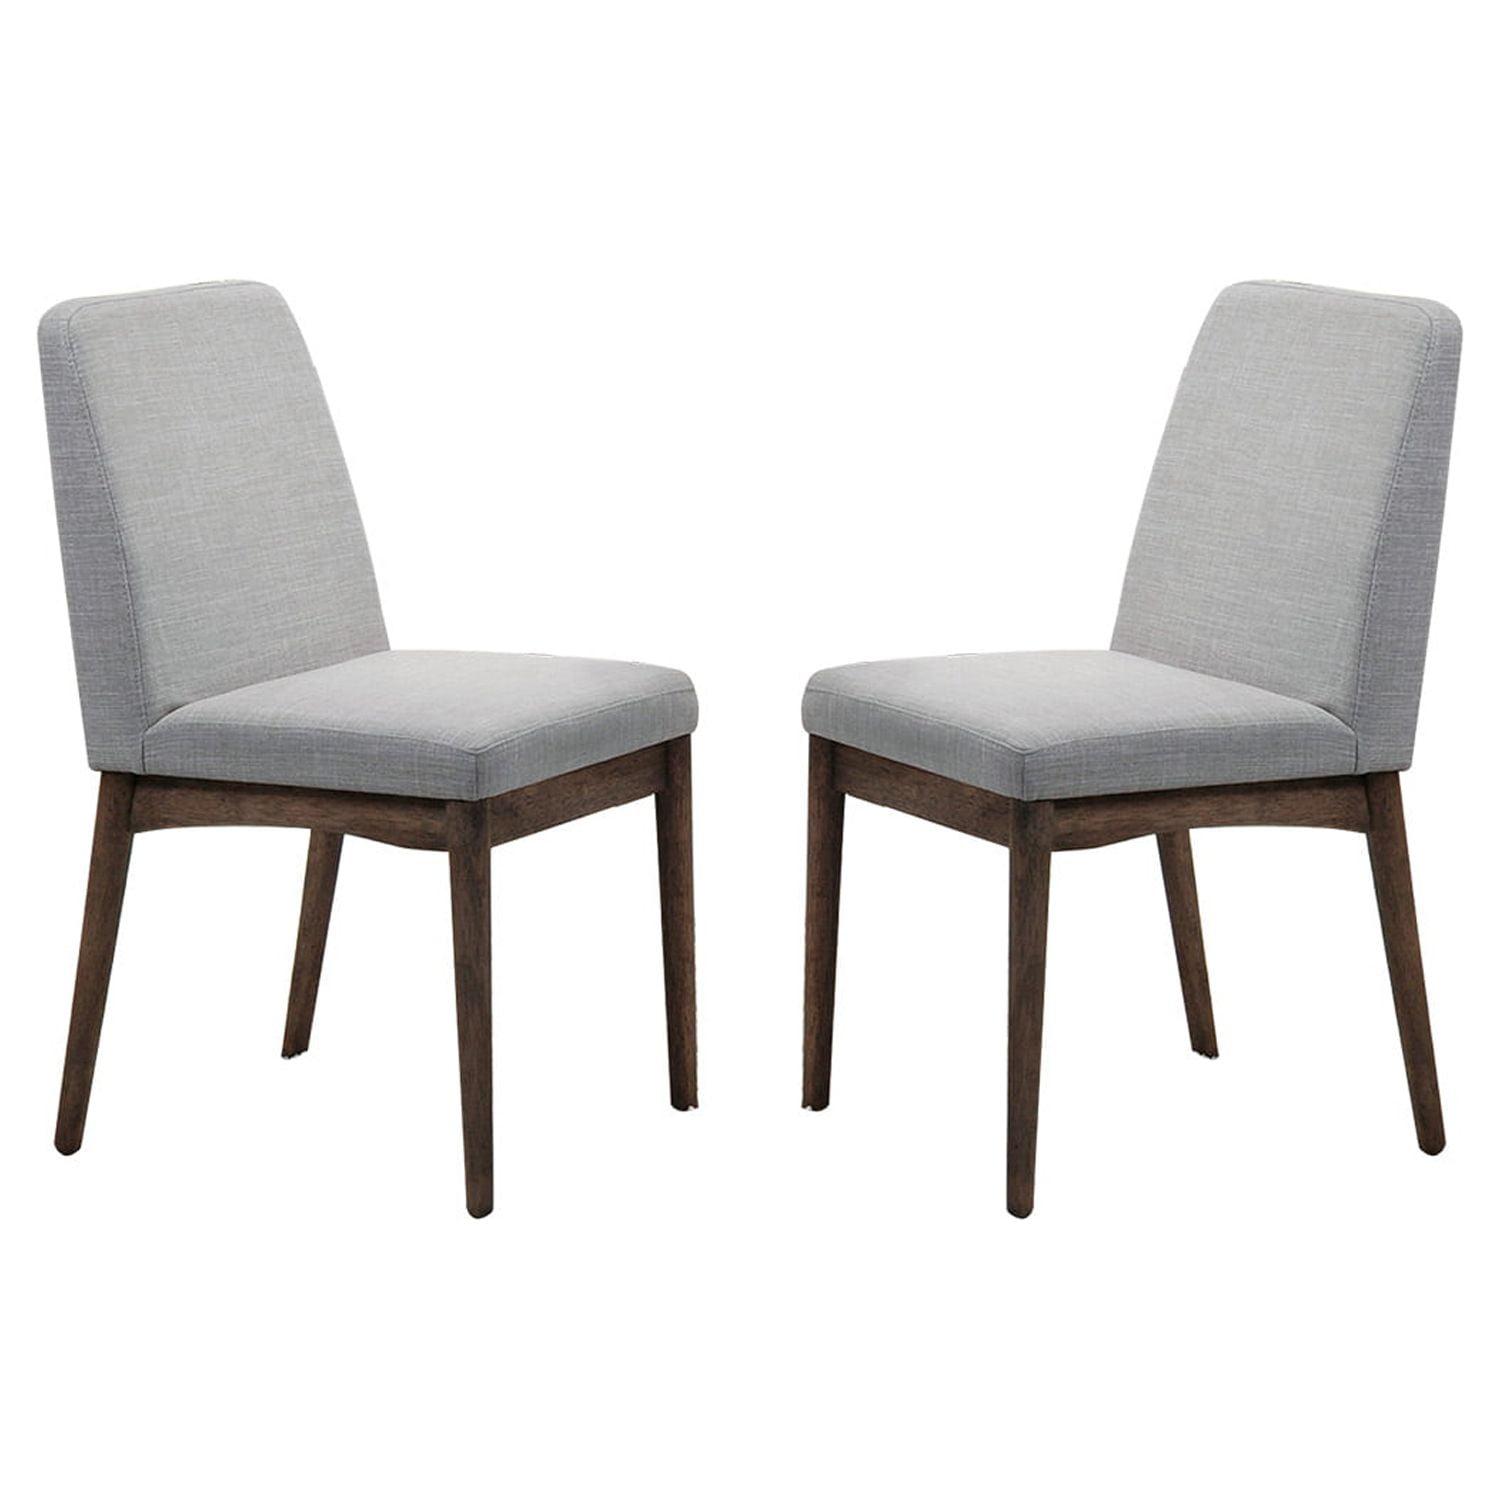 Mid-Century Modern Grey Fabric Upholstered Dining Chair with Walnut Wood Legs